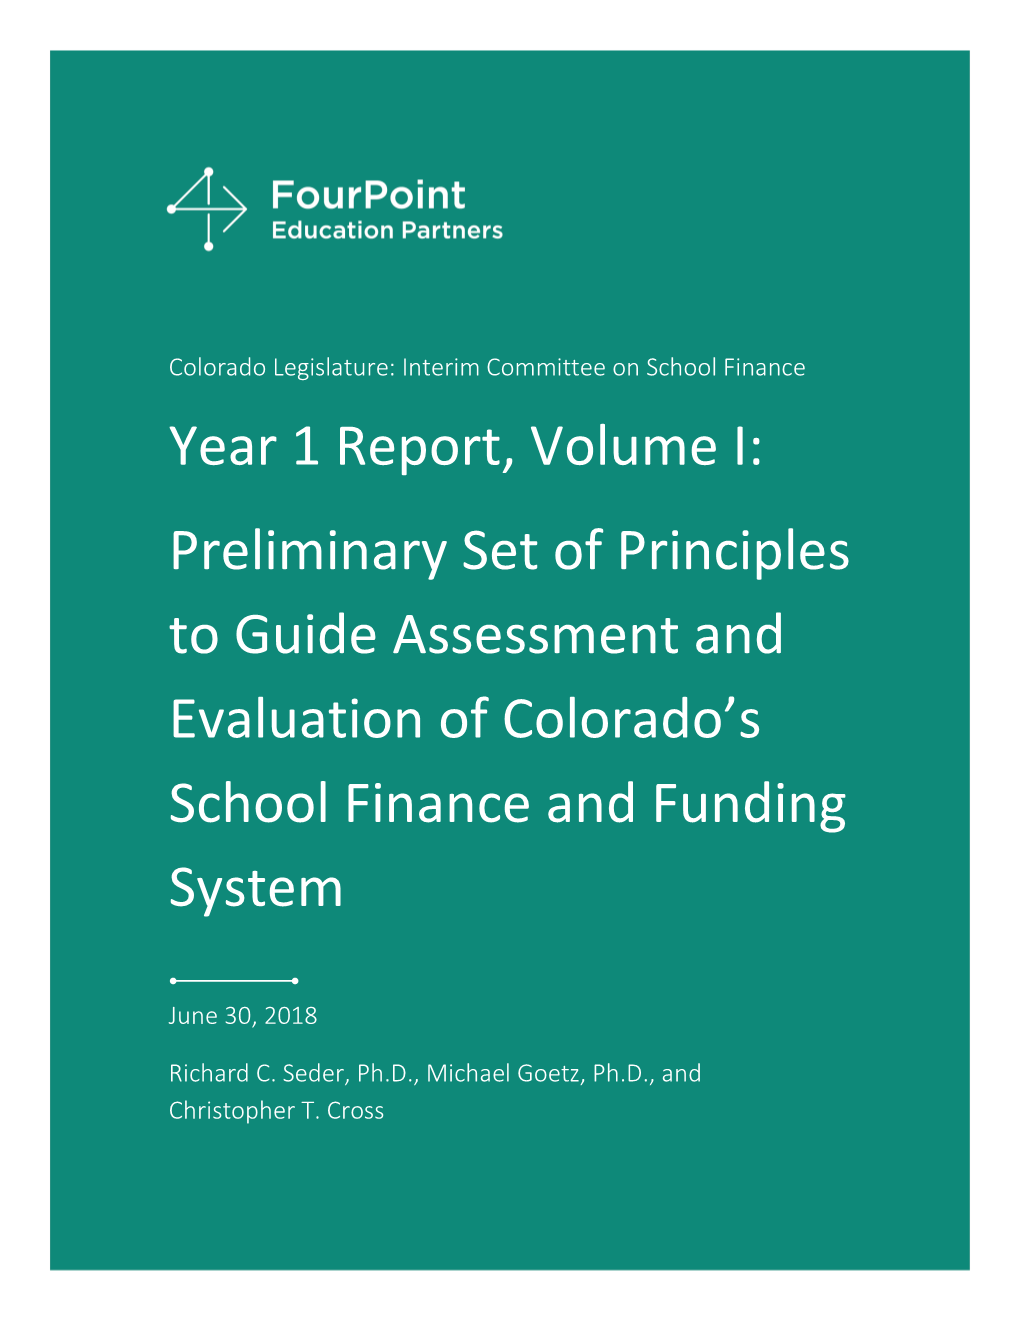 Year 1 Report, Volume I: Preliminary Set of Principles to Guide Assessment and Evaluation of Colorado’S School Finance and Funding System